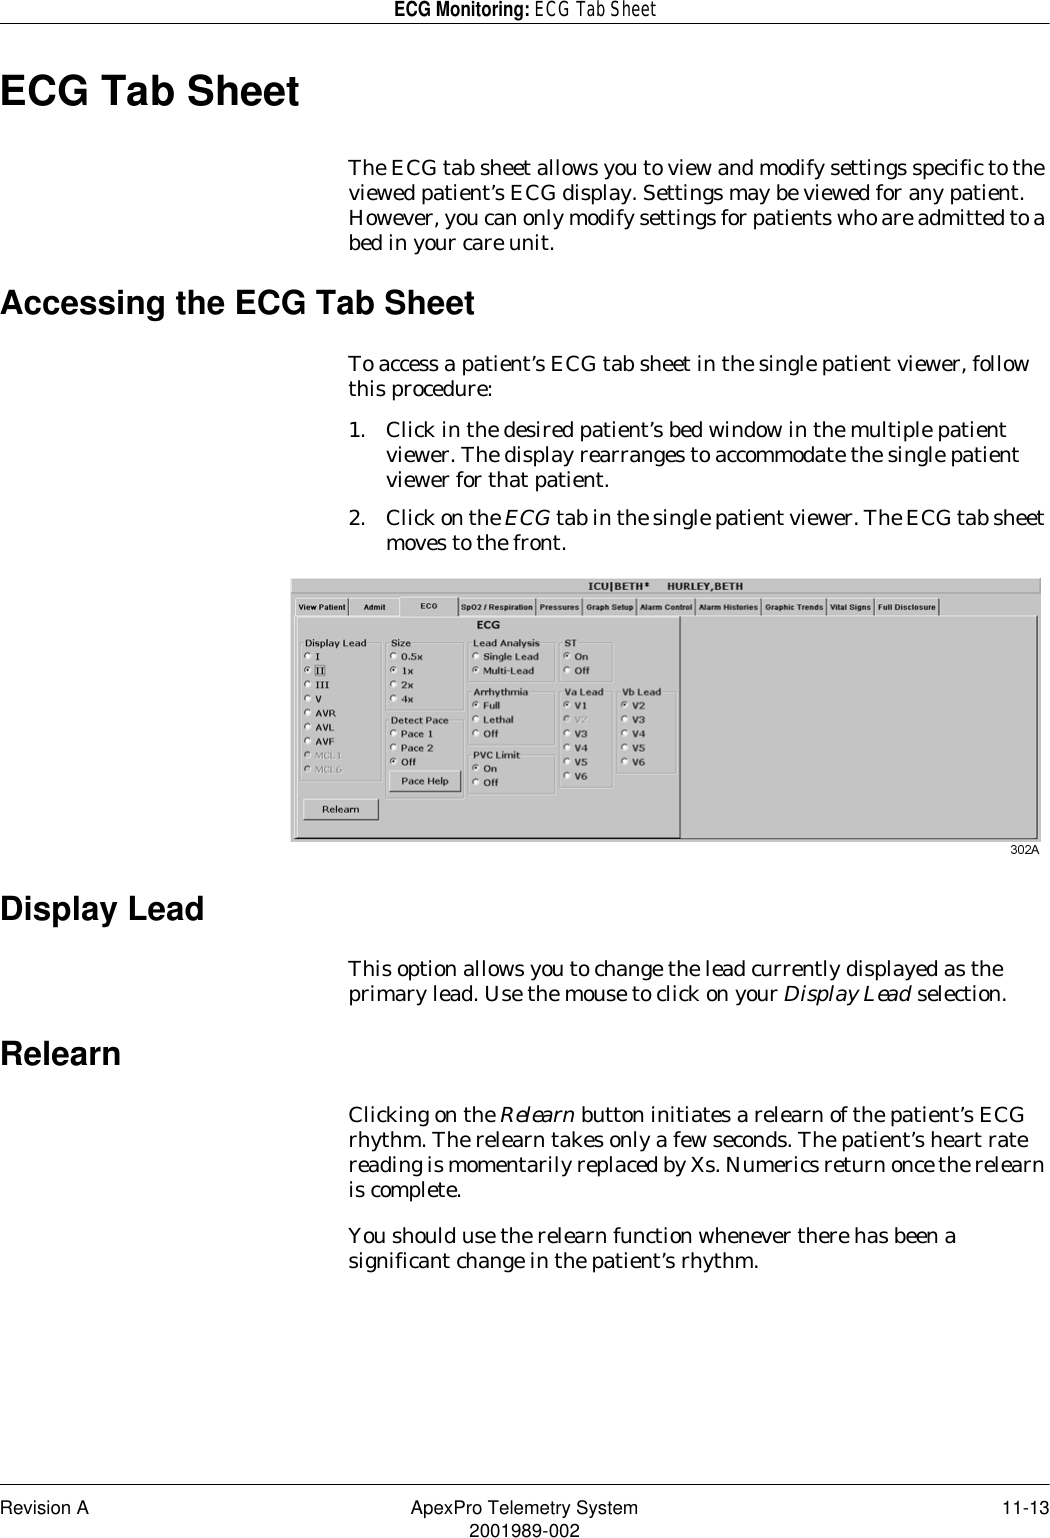 Revision A ApexPro Telemetry System 11-132001989-002ECG Monitoring: ECG Tab SheetECG Tab SheetThe ECG tab sheet allows you to view and modify settings specific to the viewed patient’s ECG display. Settings may be viewed for any patient. However, you can only modify settings for patients who are admitted to a bed in your care unit.Accessing the ECG Tab SheetTo access a patient’s ECG tab sheet in the single patient viewer, follow this procedure:1. Click in the desired patient’s bed window in the multiple patient viewer. The display rearranges to accommodate the single patient viewer for that patient.2. Click on the ECG tab in the single patient viewer. The ECG tab sheet moves to the front.Display LeadThis option allows you to change the lead currently displayed as the primary lead. Use the mouse to click on your Display Lead selection.RelearnClicking on the Relearn button initiates a relearn of the patient’s ECG rhythm. The relearn takes only a few seconds. The patient’s heart rate reading is momentarily replaced by Xs. Numerics return once the relearn is complete. You should use the relearn function whenever there has been a significant change in the patient’s rhythm.